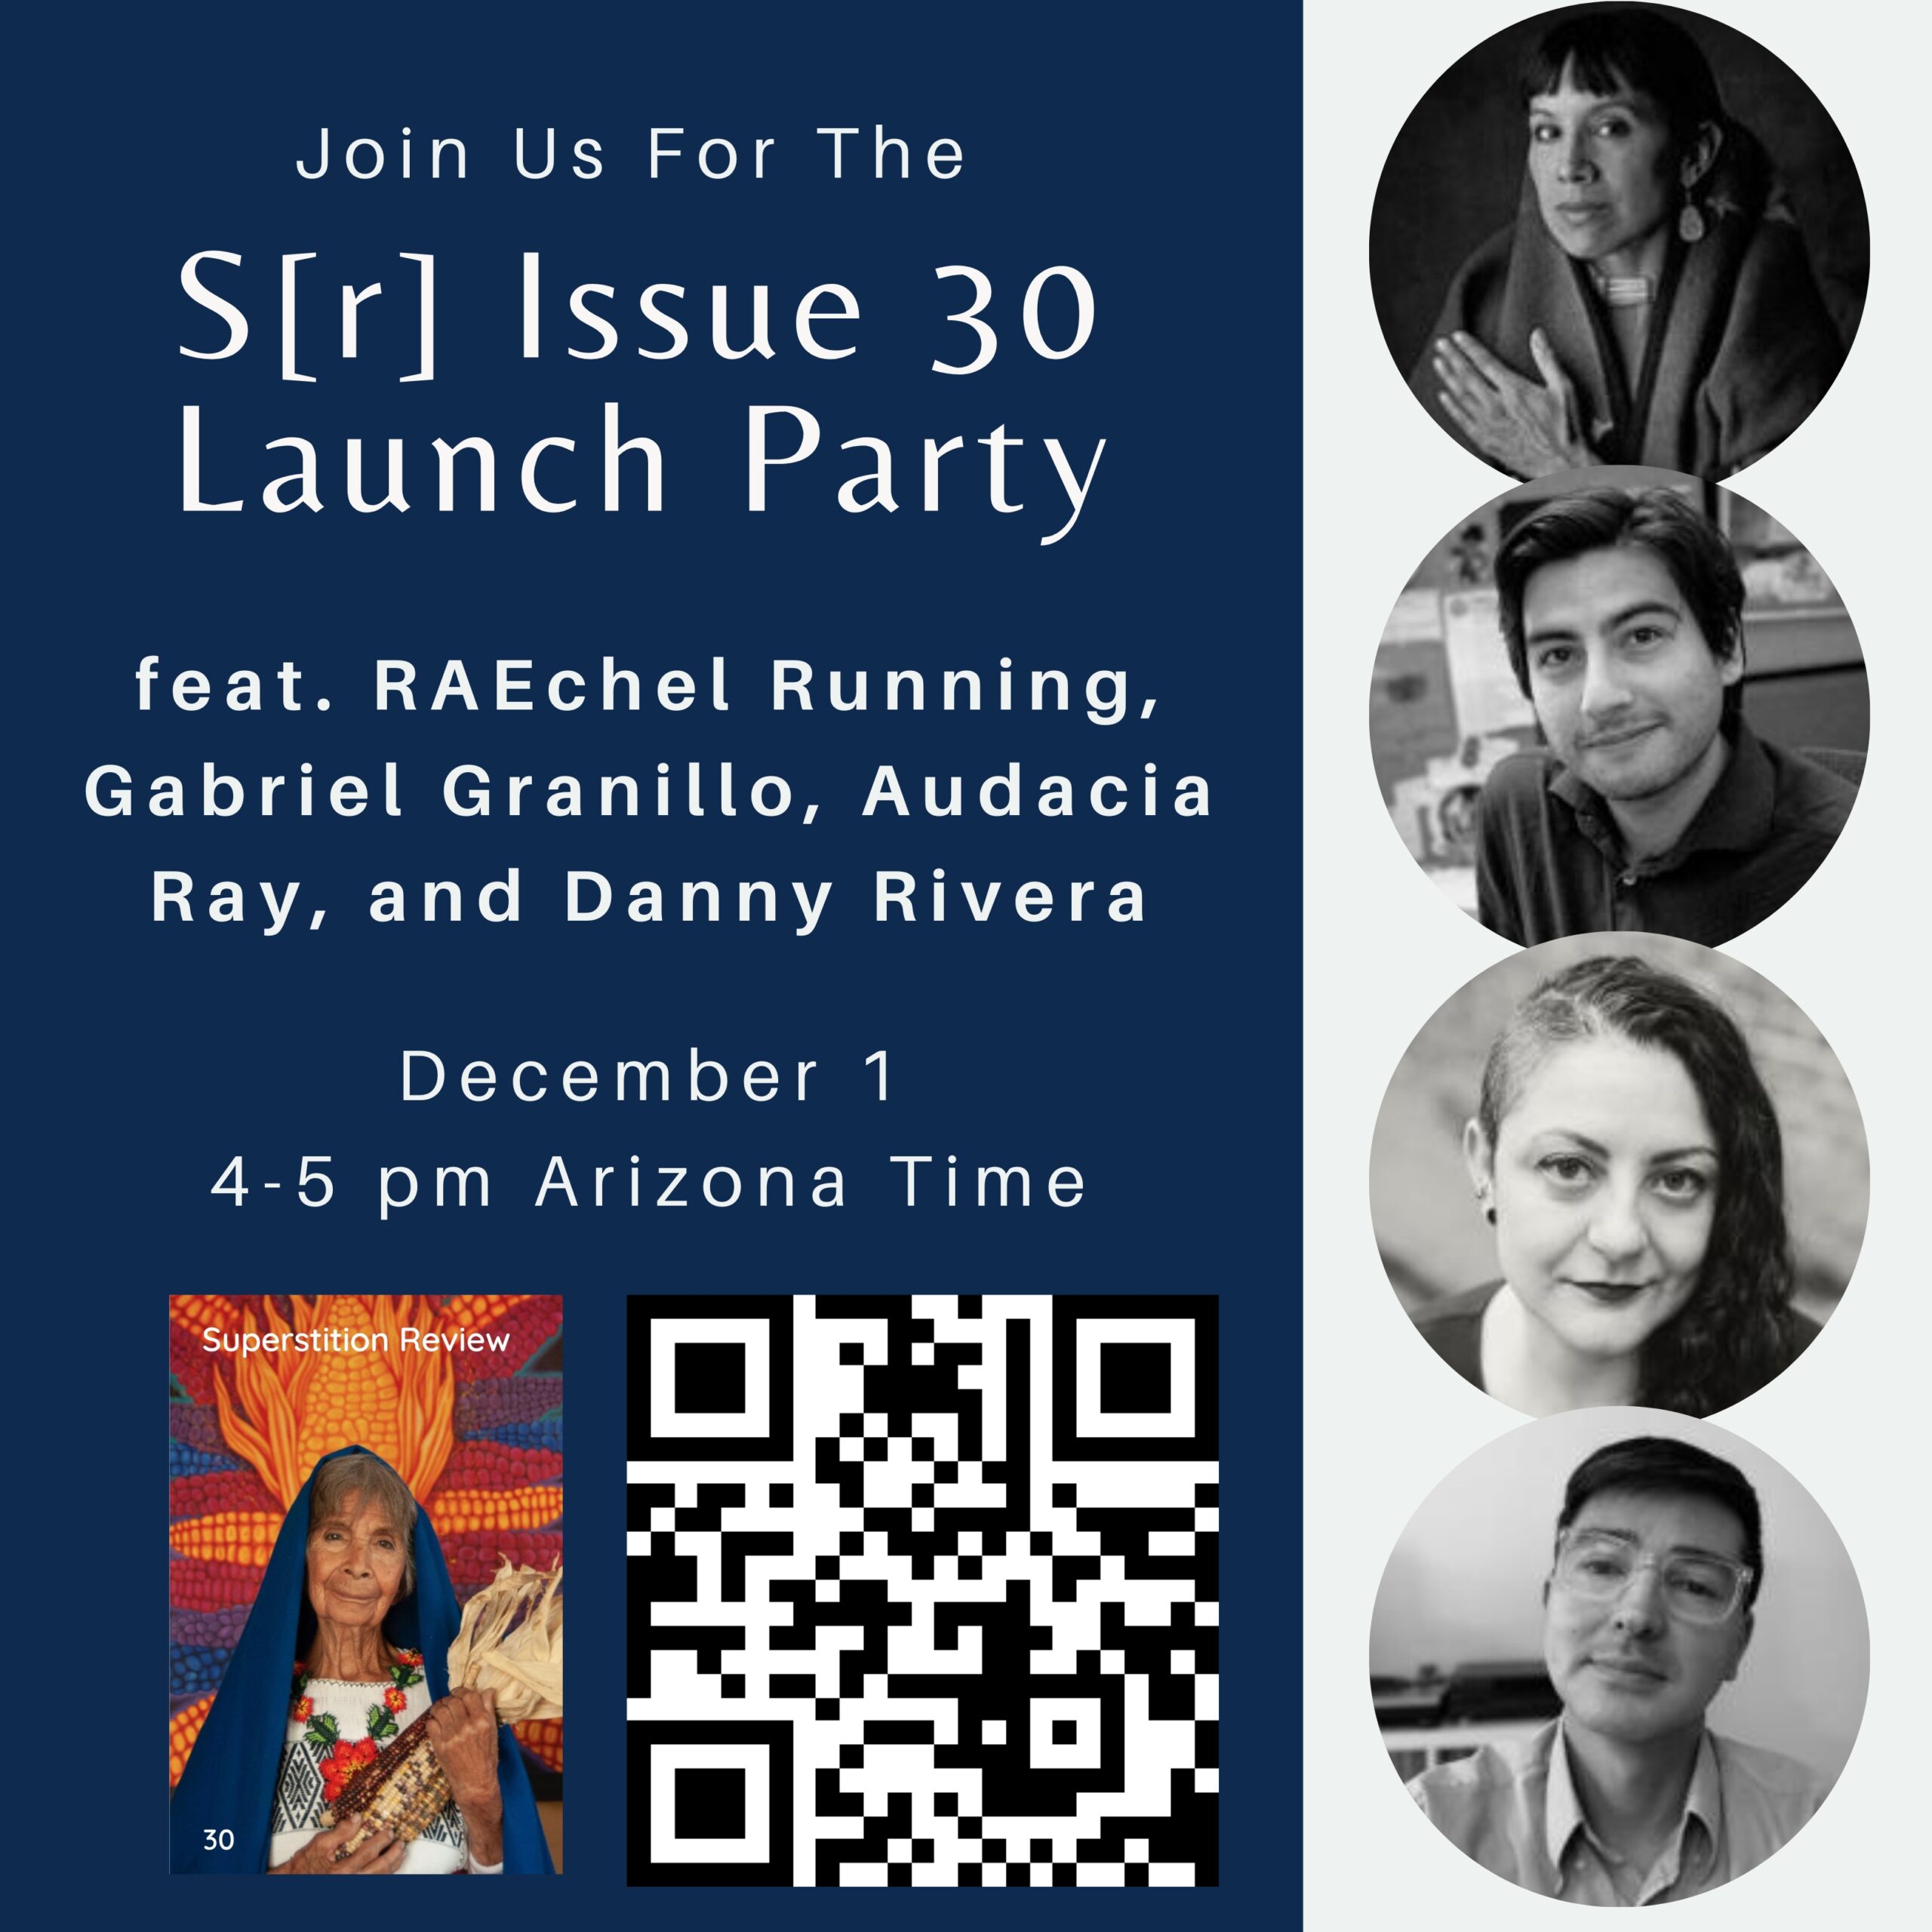 The poster for Issue 30's Launch Party. The text reads: "Join us for the SR Issue 30 Launch Party. Feat. RAEchel Running, Gabriel Granillo, Audacia Ray, and Danny Rivera. December 1 4-5 pm AZ time."